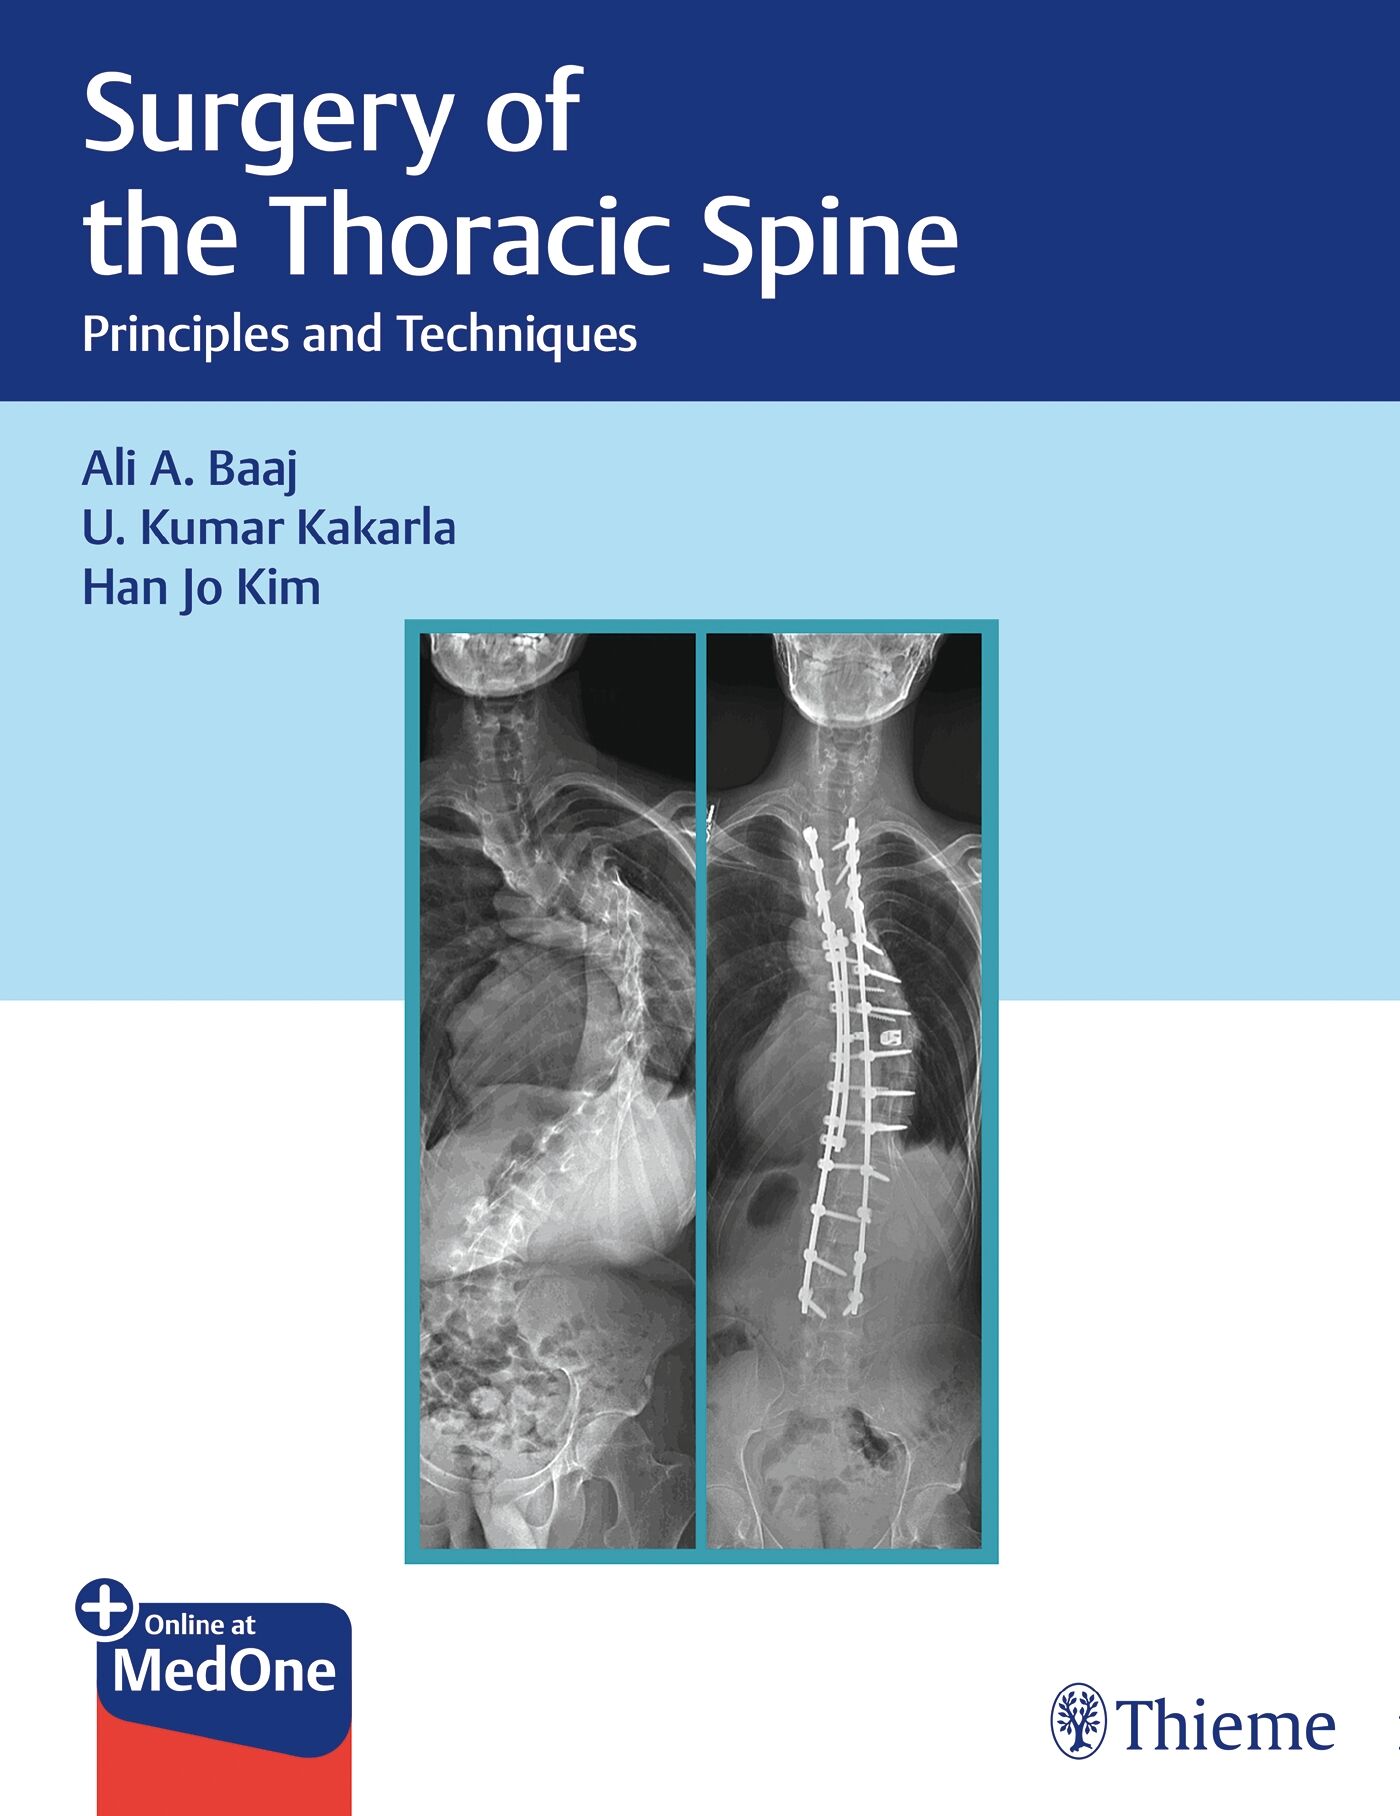 Surgery of the Thoracic Spine, 9781626238558